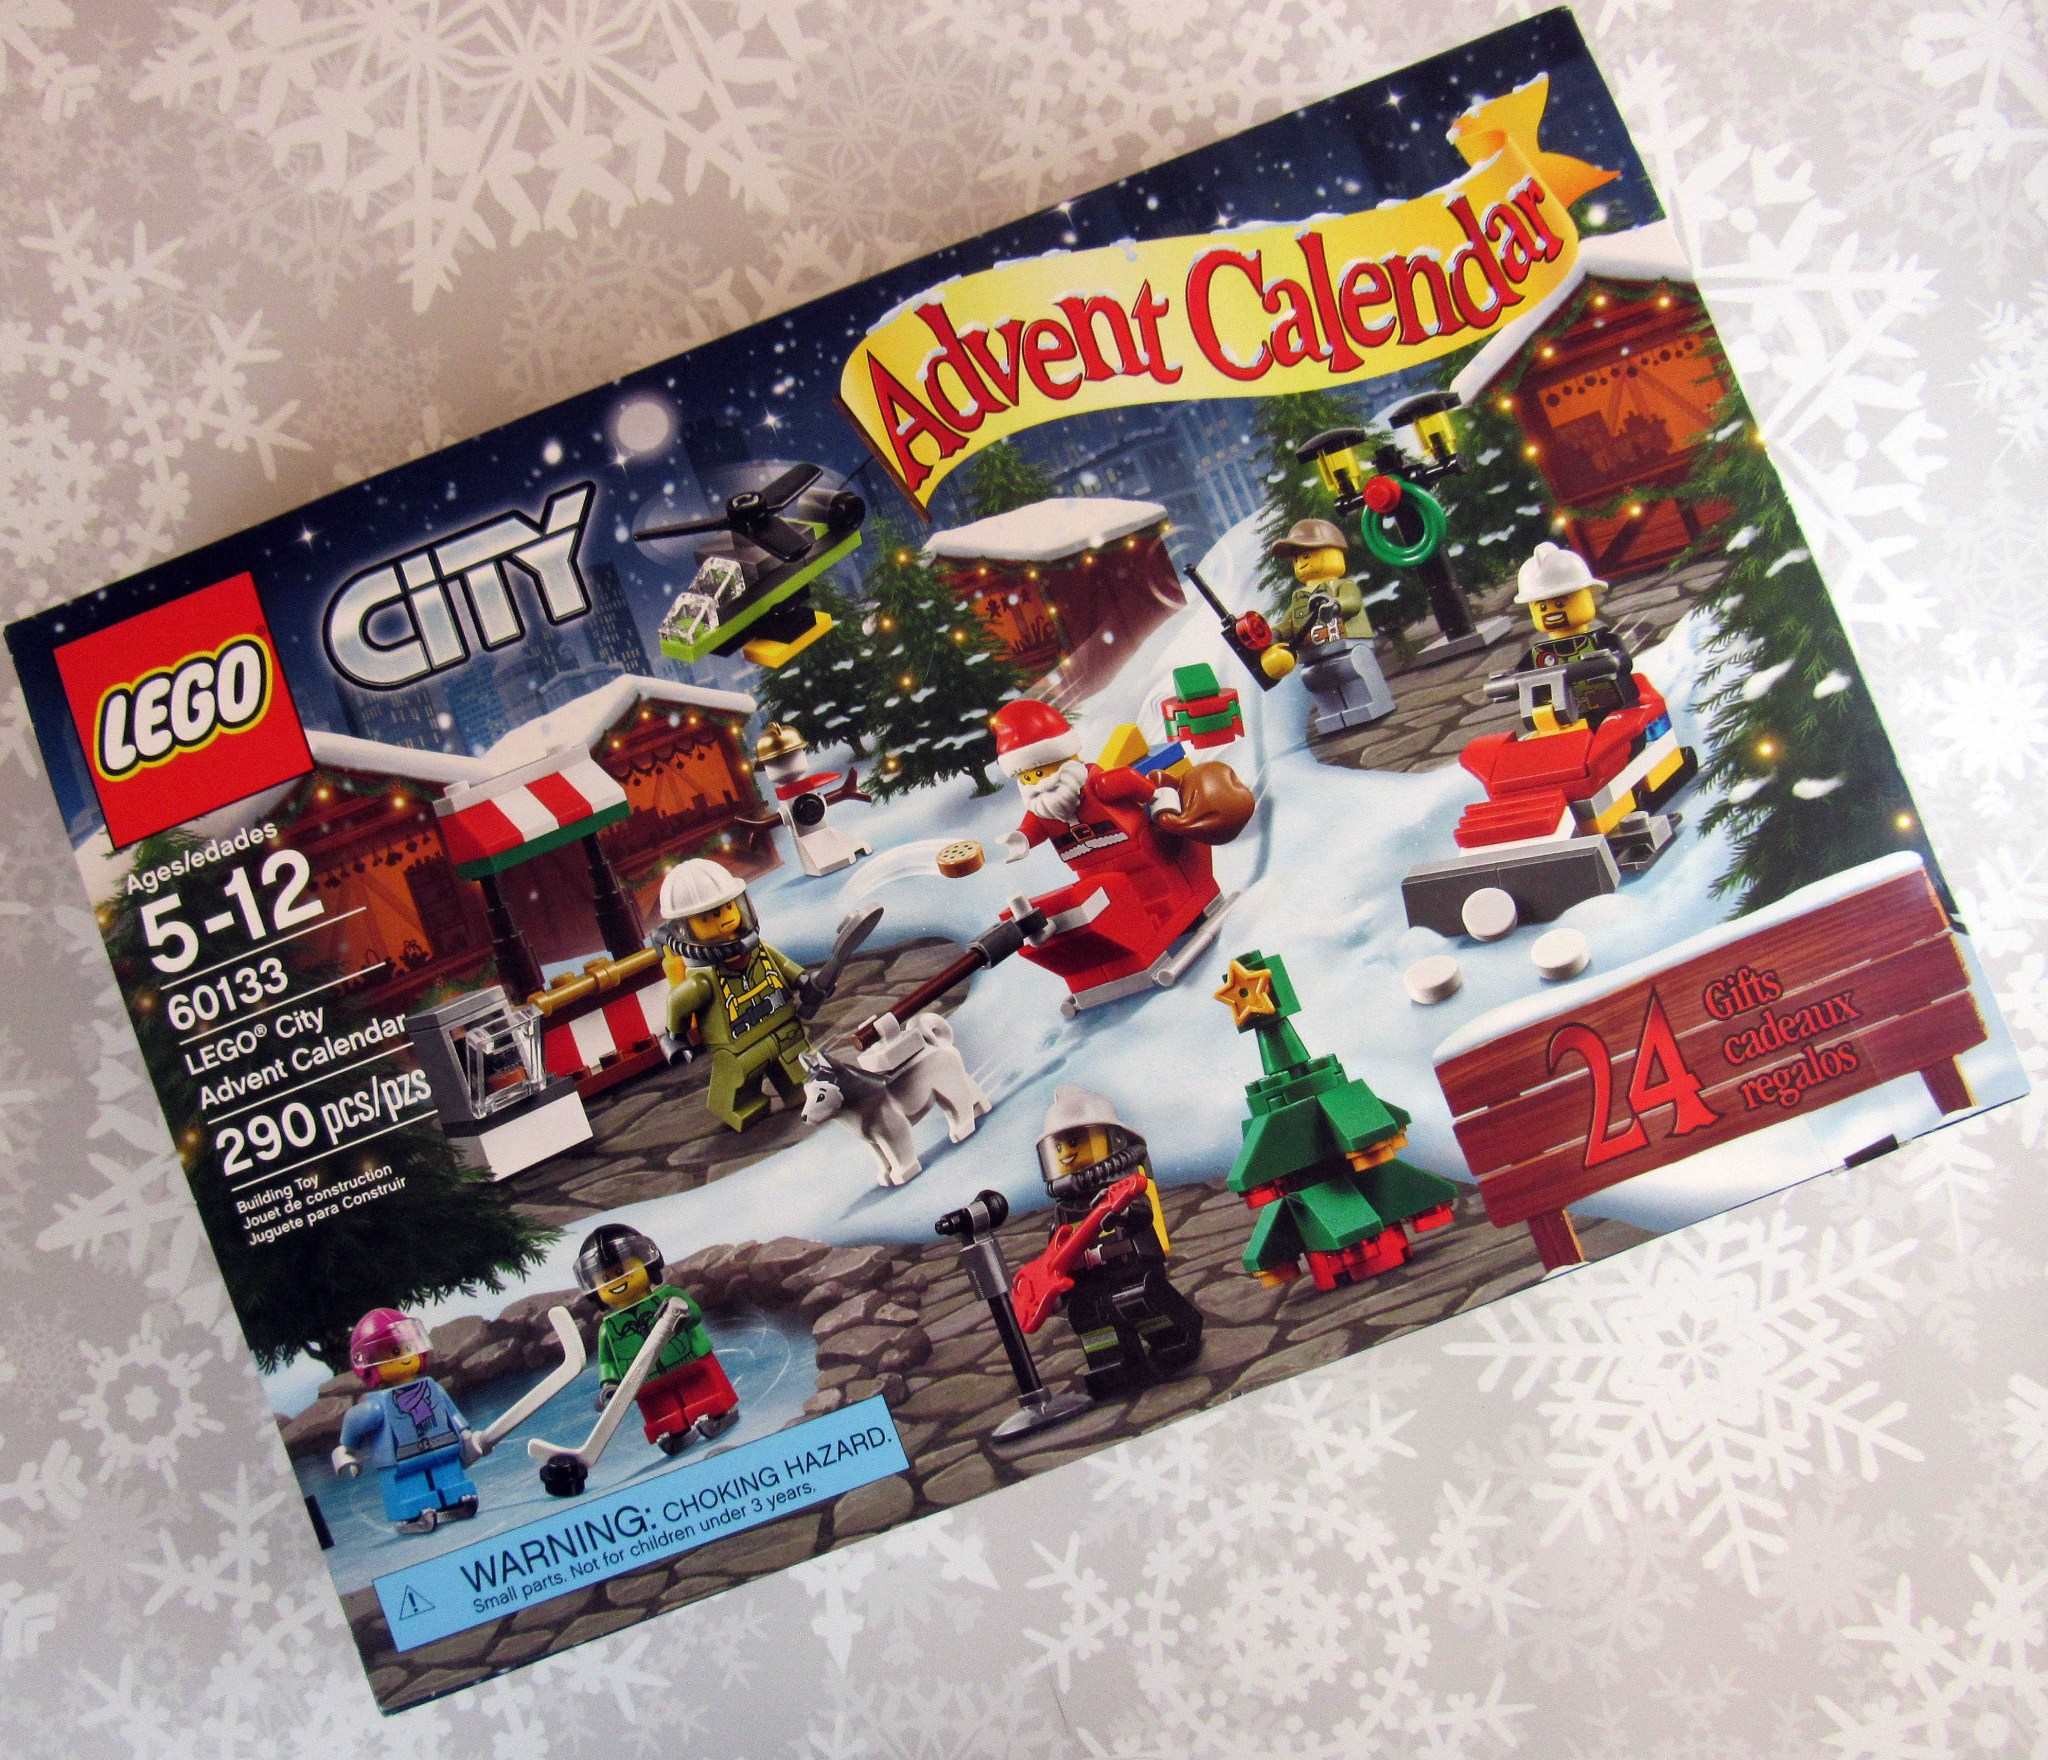 Lego Advent Calendar Reviews: Get All The Details At Hello Subscription!